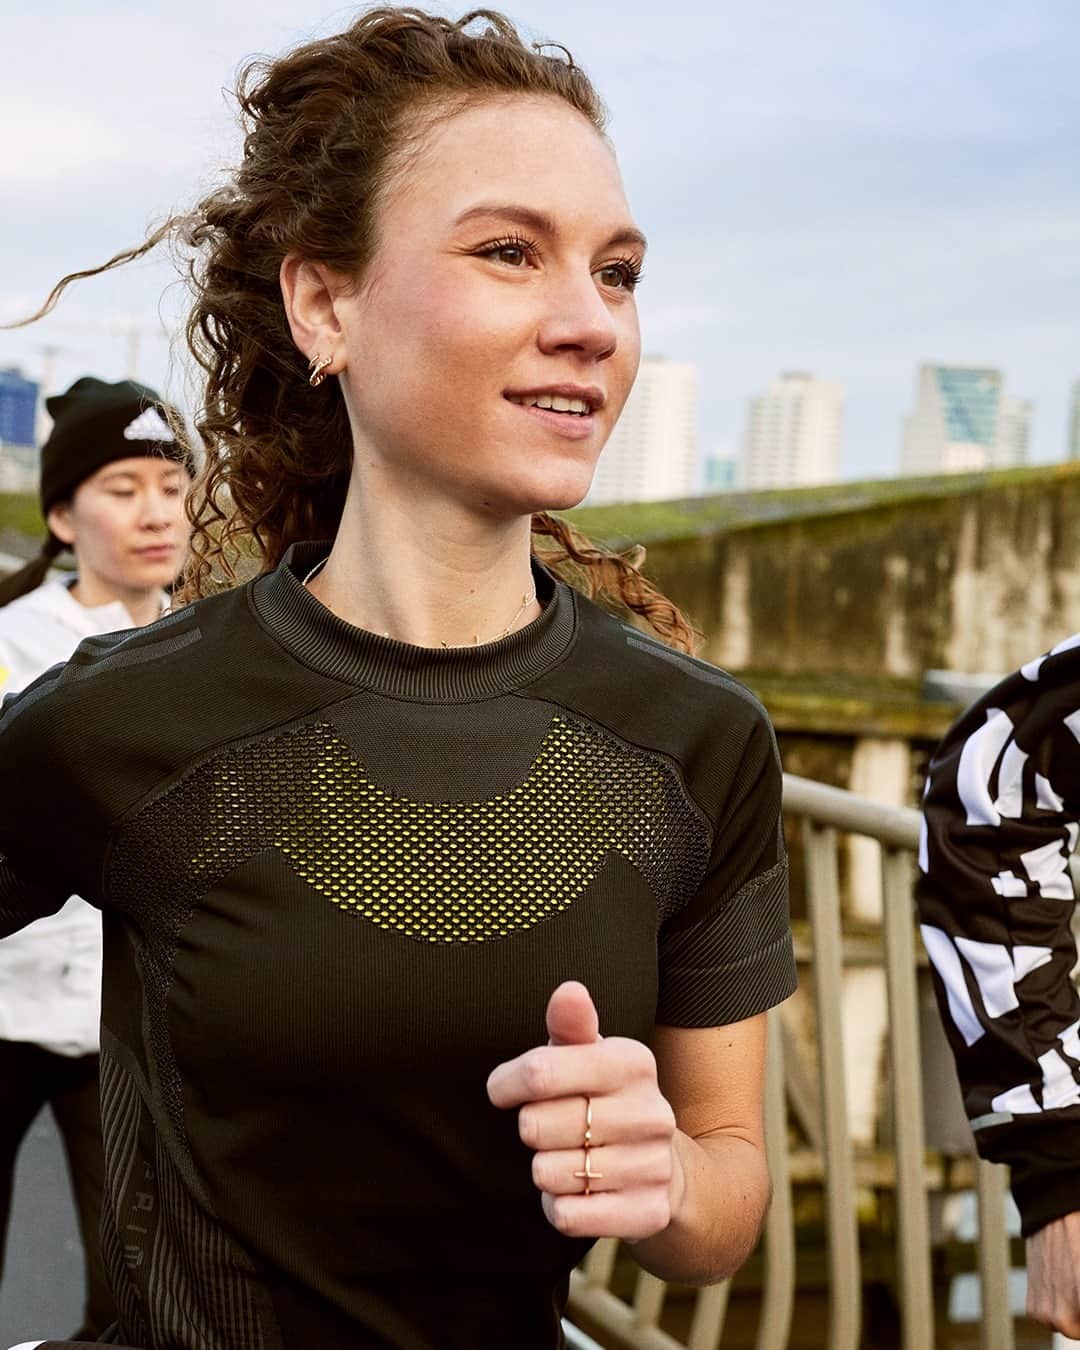 adidas Runningのインスタグラム：「🚨 New running challenge alert! 🚨  👉 Head to the adidas Running app 👉 Sign up to The Energy Challenge 👉 Run for 120 minutes from the 1st to the 13th of February 👉 FEEL THE ENERGY  And who knows, there may even be an exciting prize waiting for you at the end!  Tag whoever needs to know about this 👇」